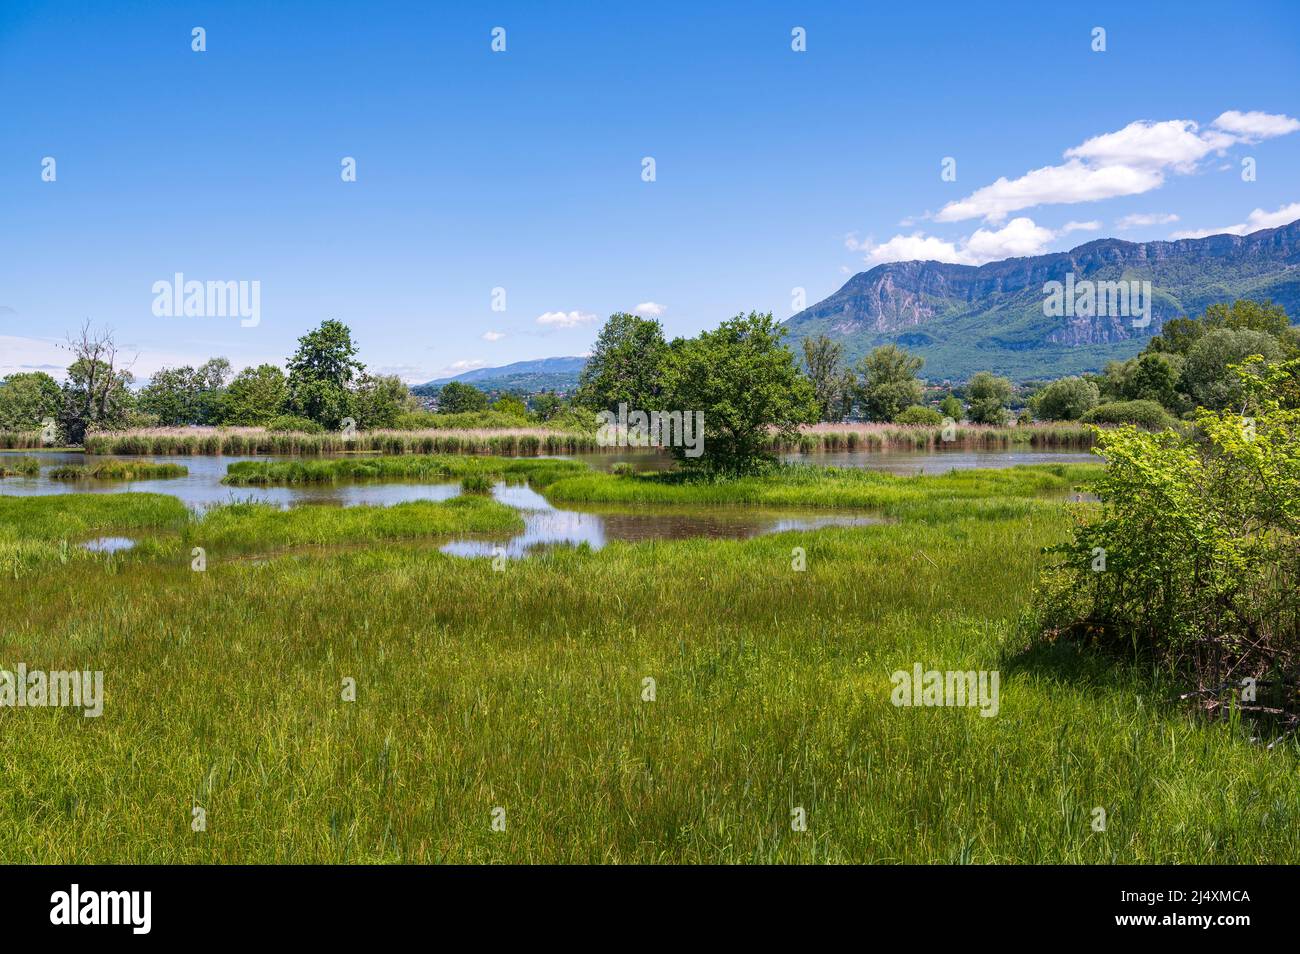 A swamp at Lac du Bourget, the largest lake of the French Alps, at Le Bourget-du-Lac, France Stock Photo